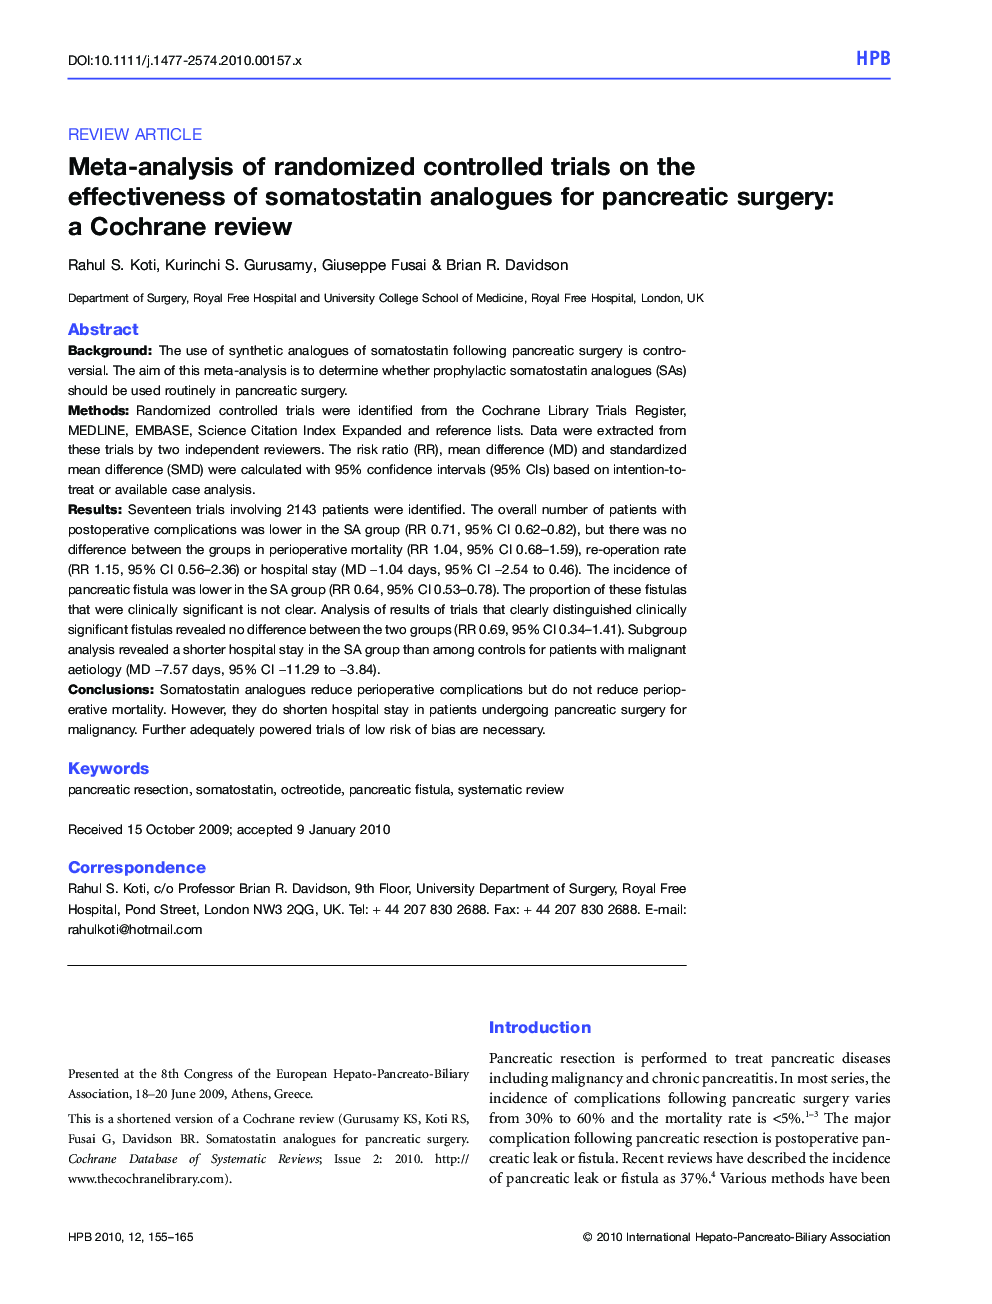 Meta-analysis of randomized controlled trials on the effectiveness of somatostatin analogues for pancreatic surgery: a Cochrane review